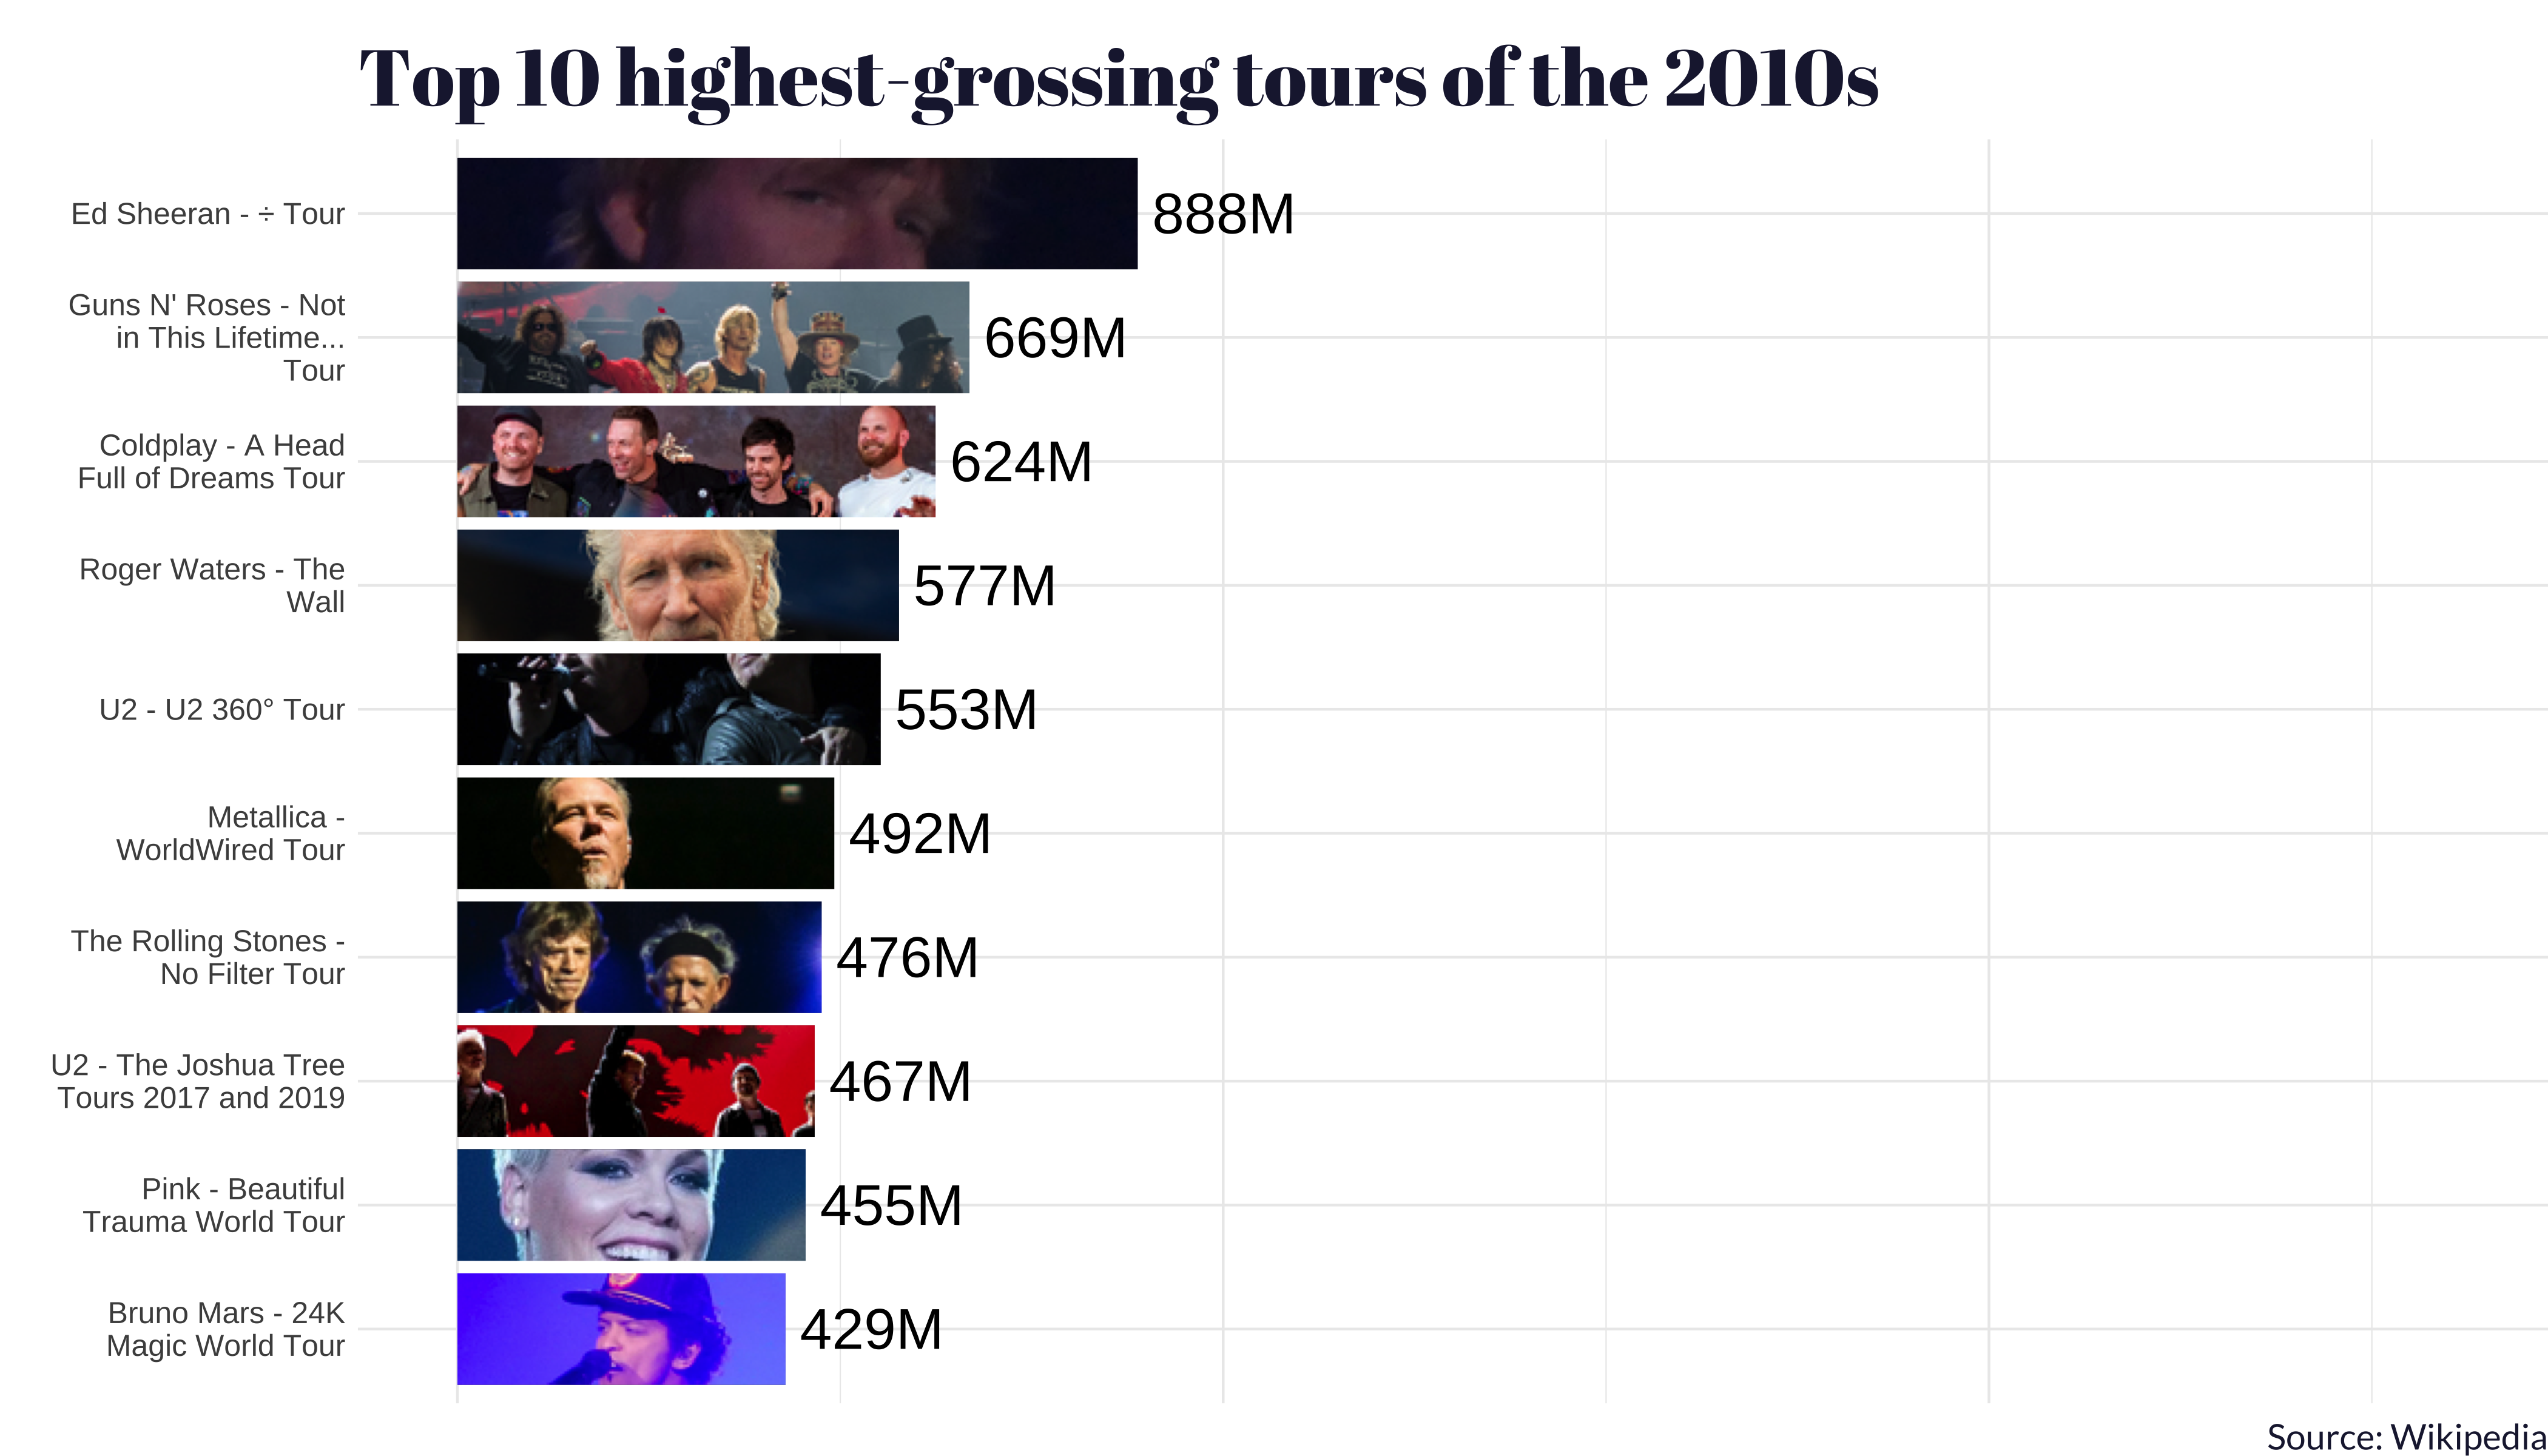 The image is a bar chart titled Top 10 highest-grossing tours of the 2010s with a white background. It lists musical tours from the 2010s with their corresponding revenue figures, each accompanied by a small image of the performing artist or band. From top to bottom, the tours and their revenues are: Ed Sheeran - ÷ Tour: 888M, Guns N' Roses - Not in This Lifetime... Tour: 669M, Coldplay - A Head Full of Dreams Tour: 624M, Roger Waters - The Wall: 577M, U2 - U2 360° Tour: 553M, Metallica - WorldWired Tour: 492M, The Rolling Stones - No Filter Tour: 476M, U2 - The Joshua Tree Tours 2017 and 2019: 467M, Pink - Beautiful Trauma World Tour: 455M, Bruno Mars - 24K Magic World Tour: 429M. On the right side of each tour name and revenue, there is a corresponding photograph of the artist or band performing live. The source of the data is credited to Wikipedia at the bottom of the image.